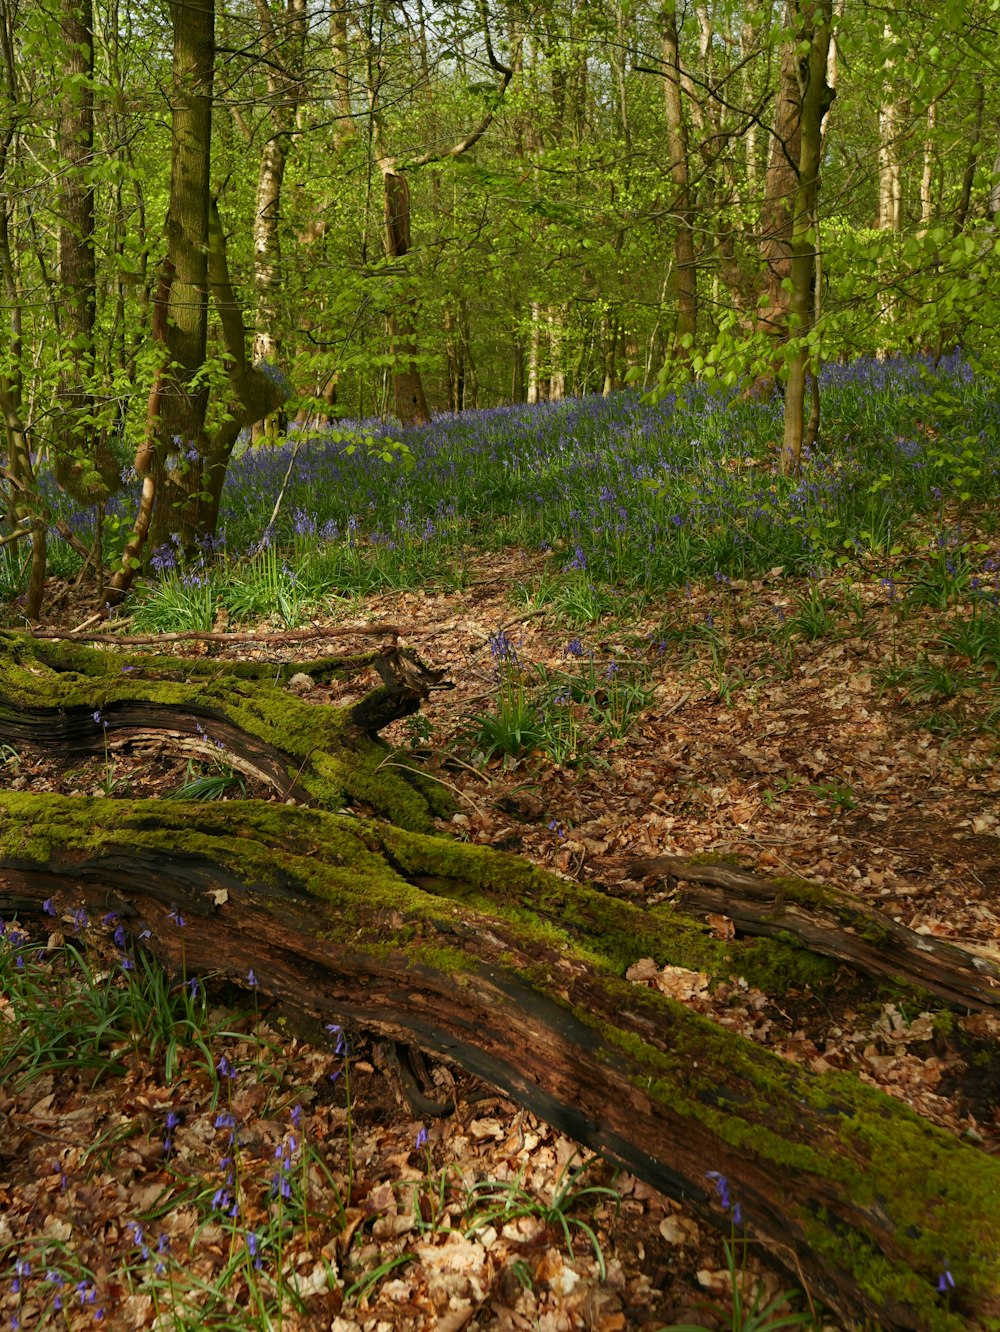 a tree stump in the middle of a forest filled with bluebells